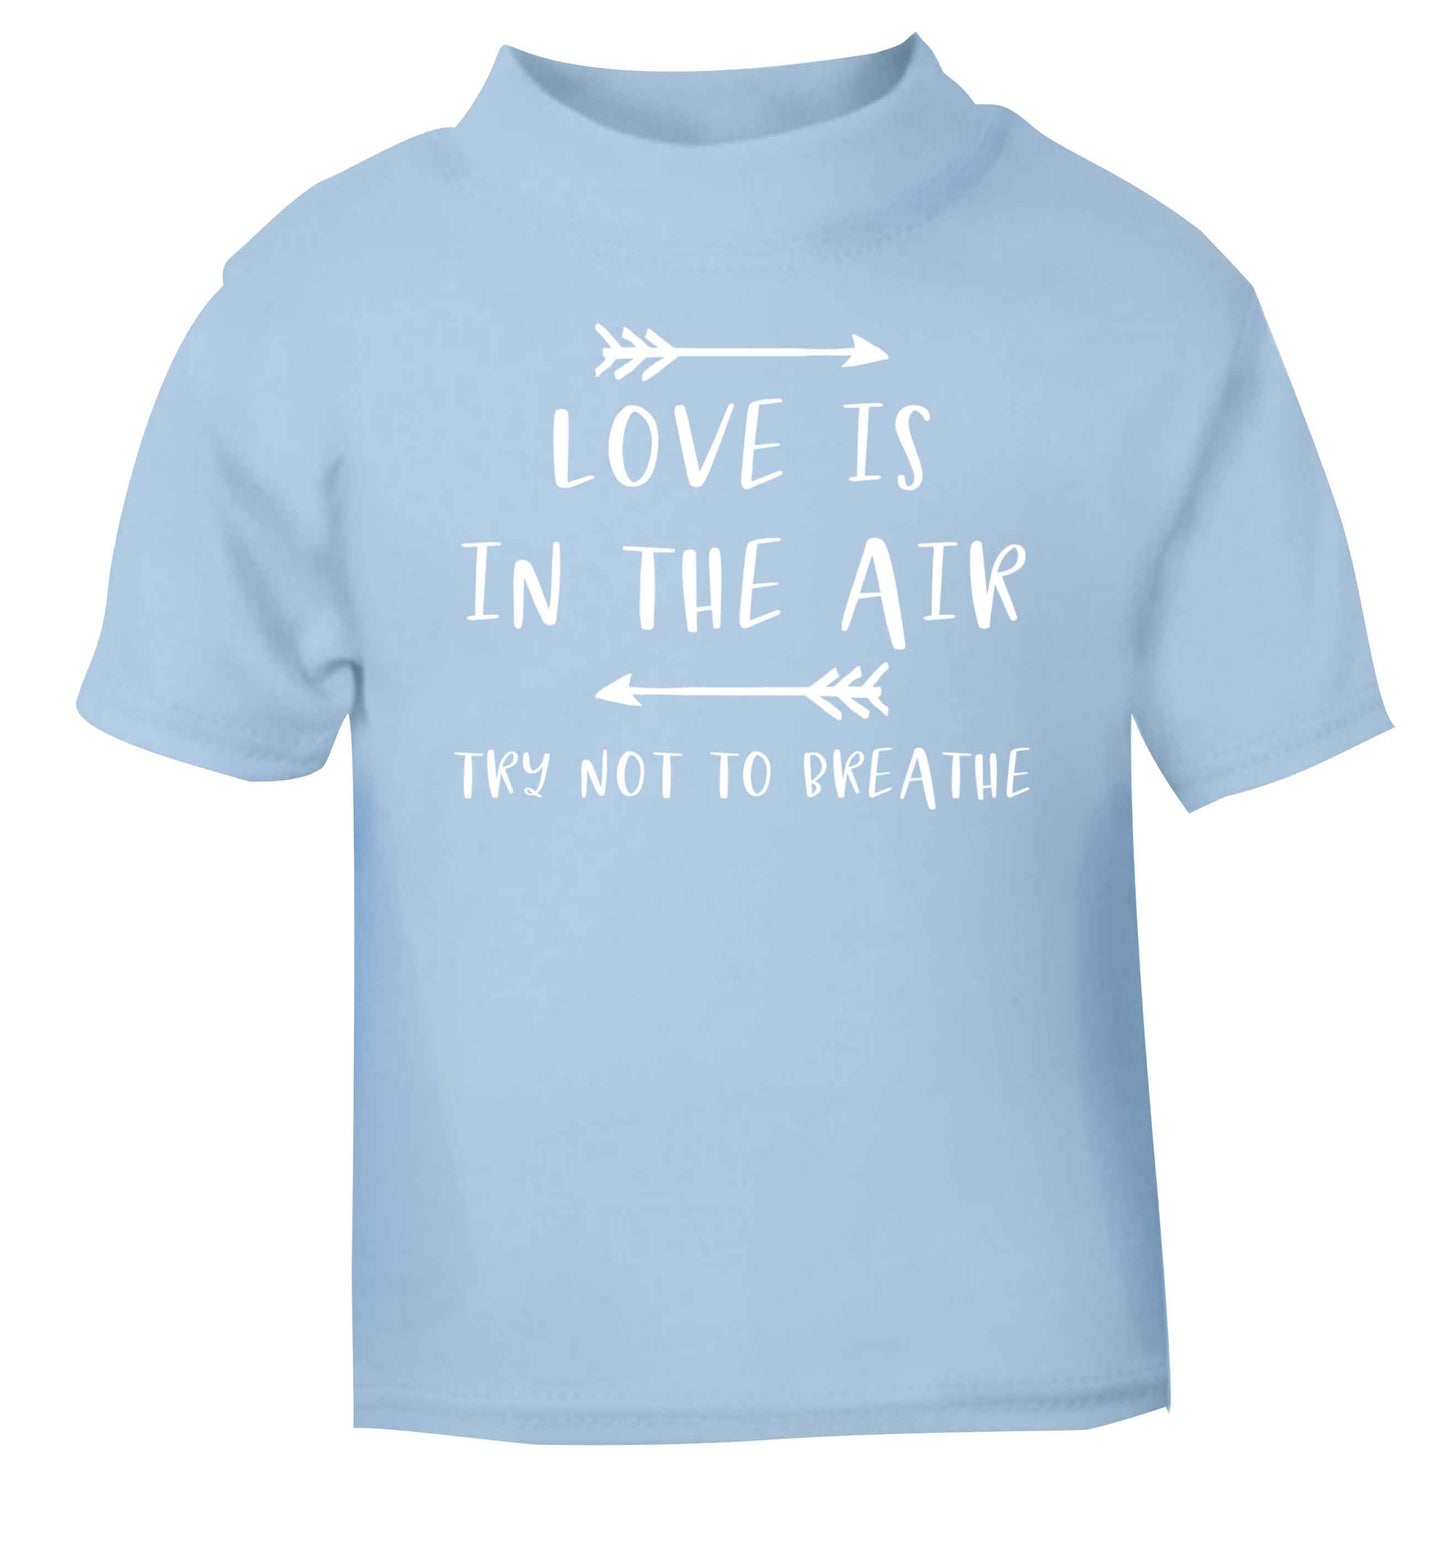 Love is in the air try not to breathe light blue baby toddler Tshirt 2 Years